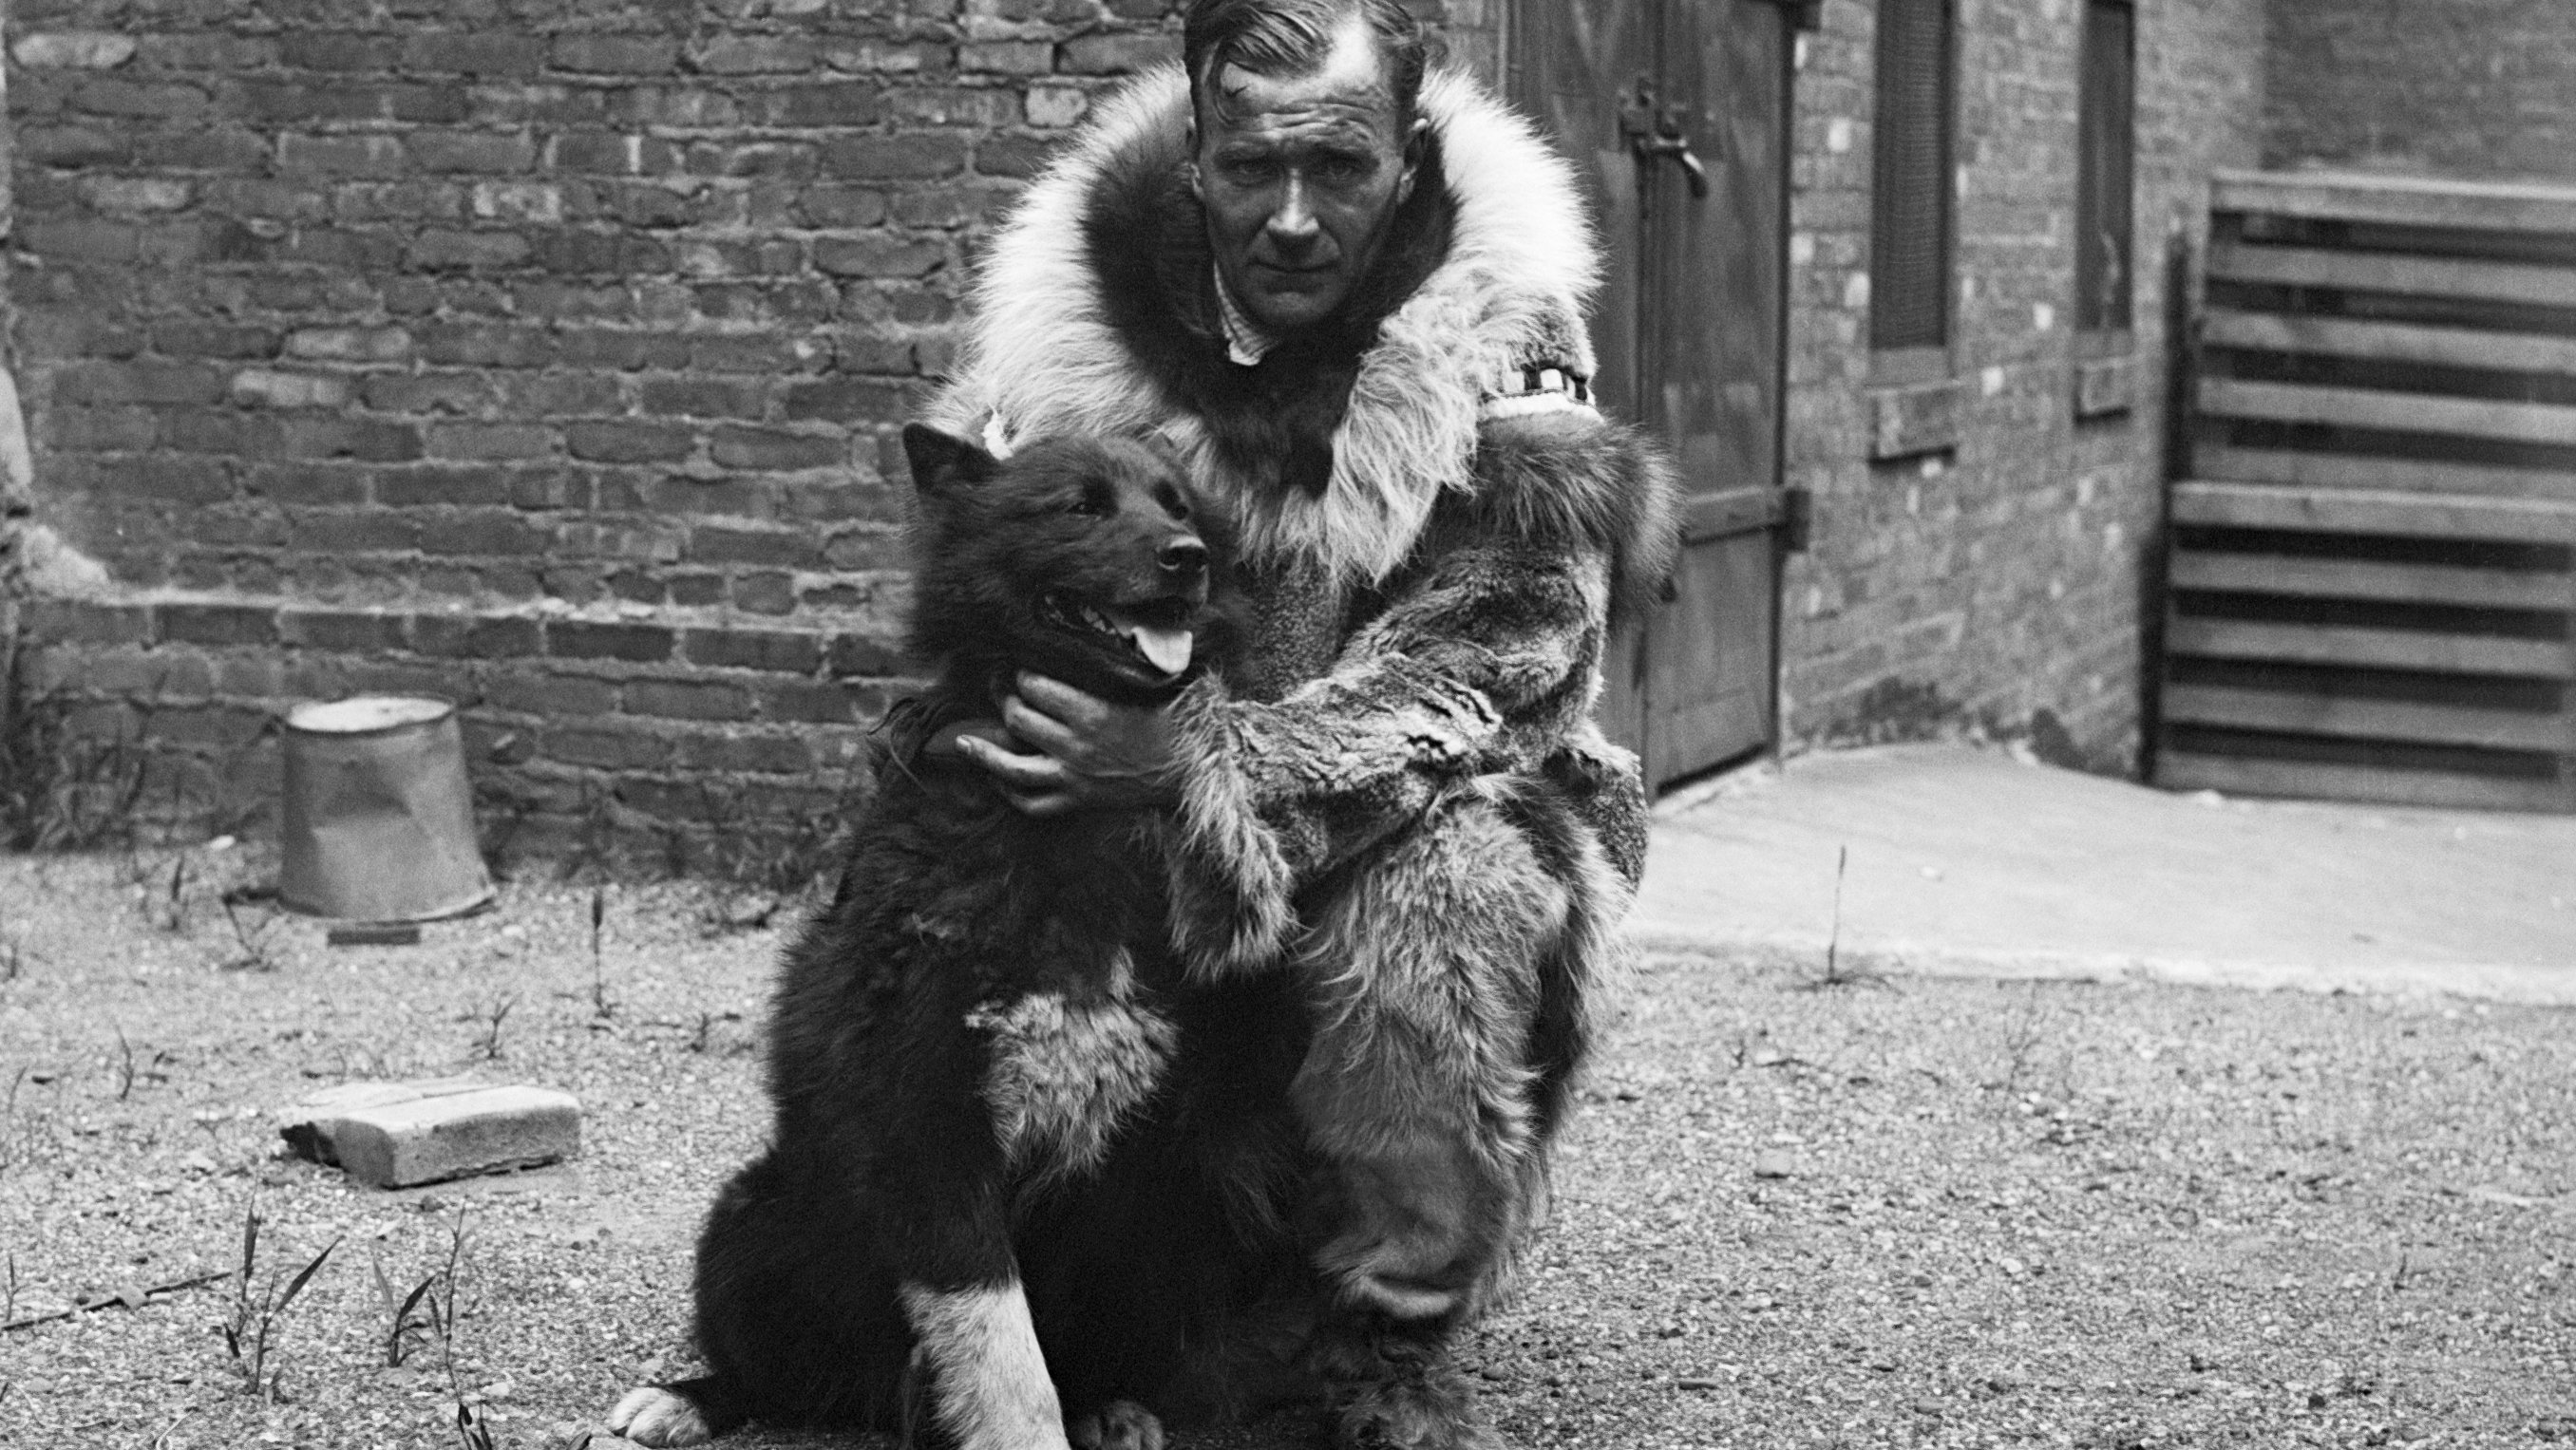 Sledder and His Famous Dog Balto